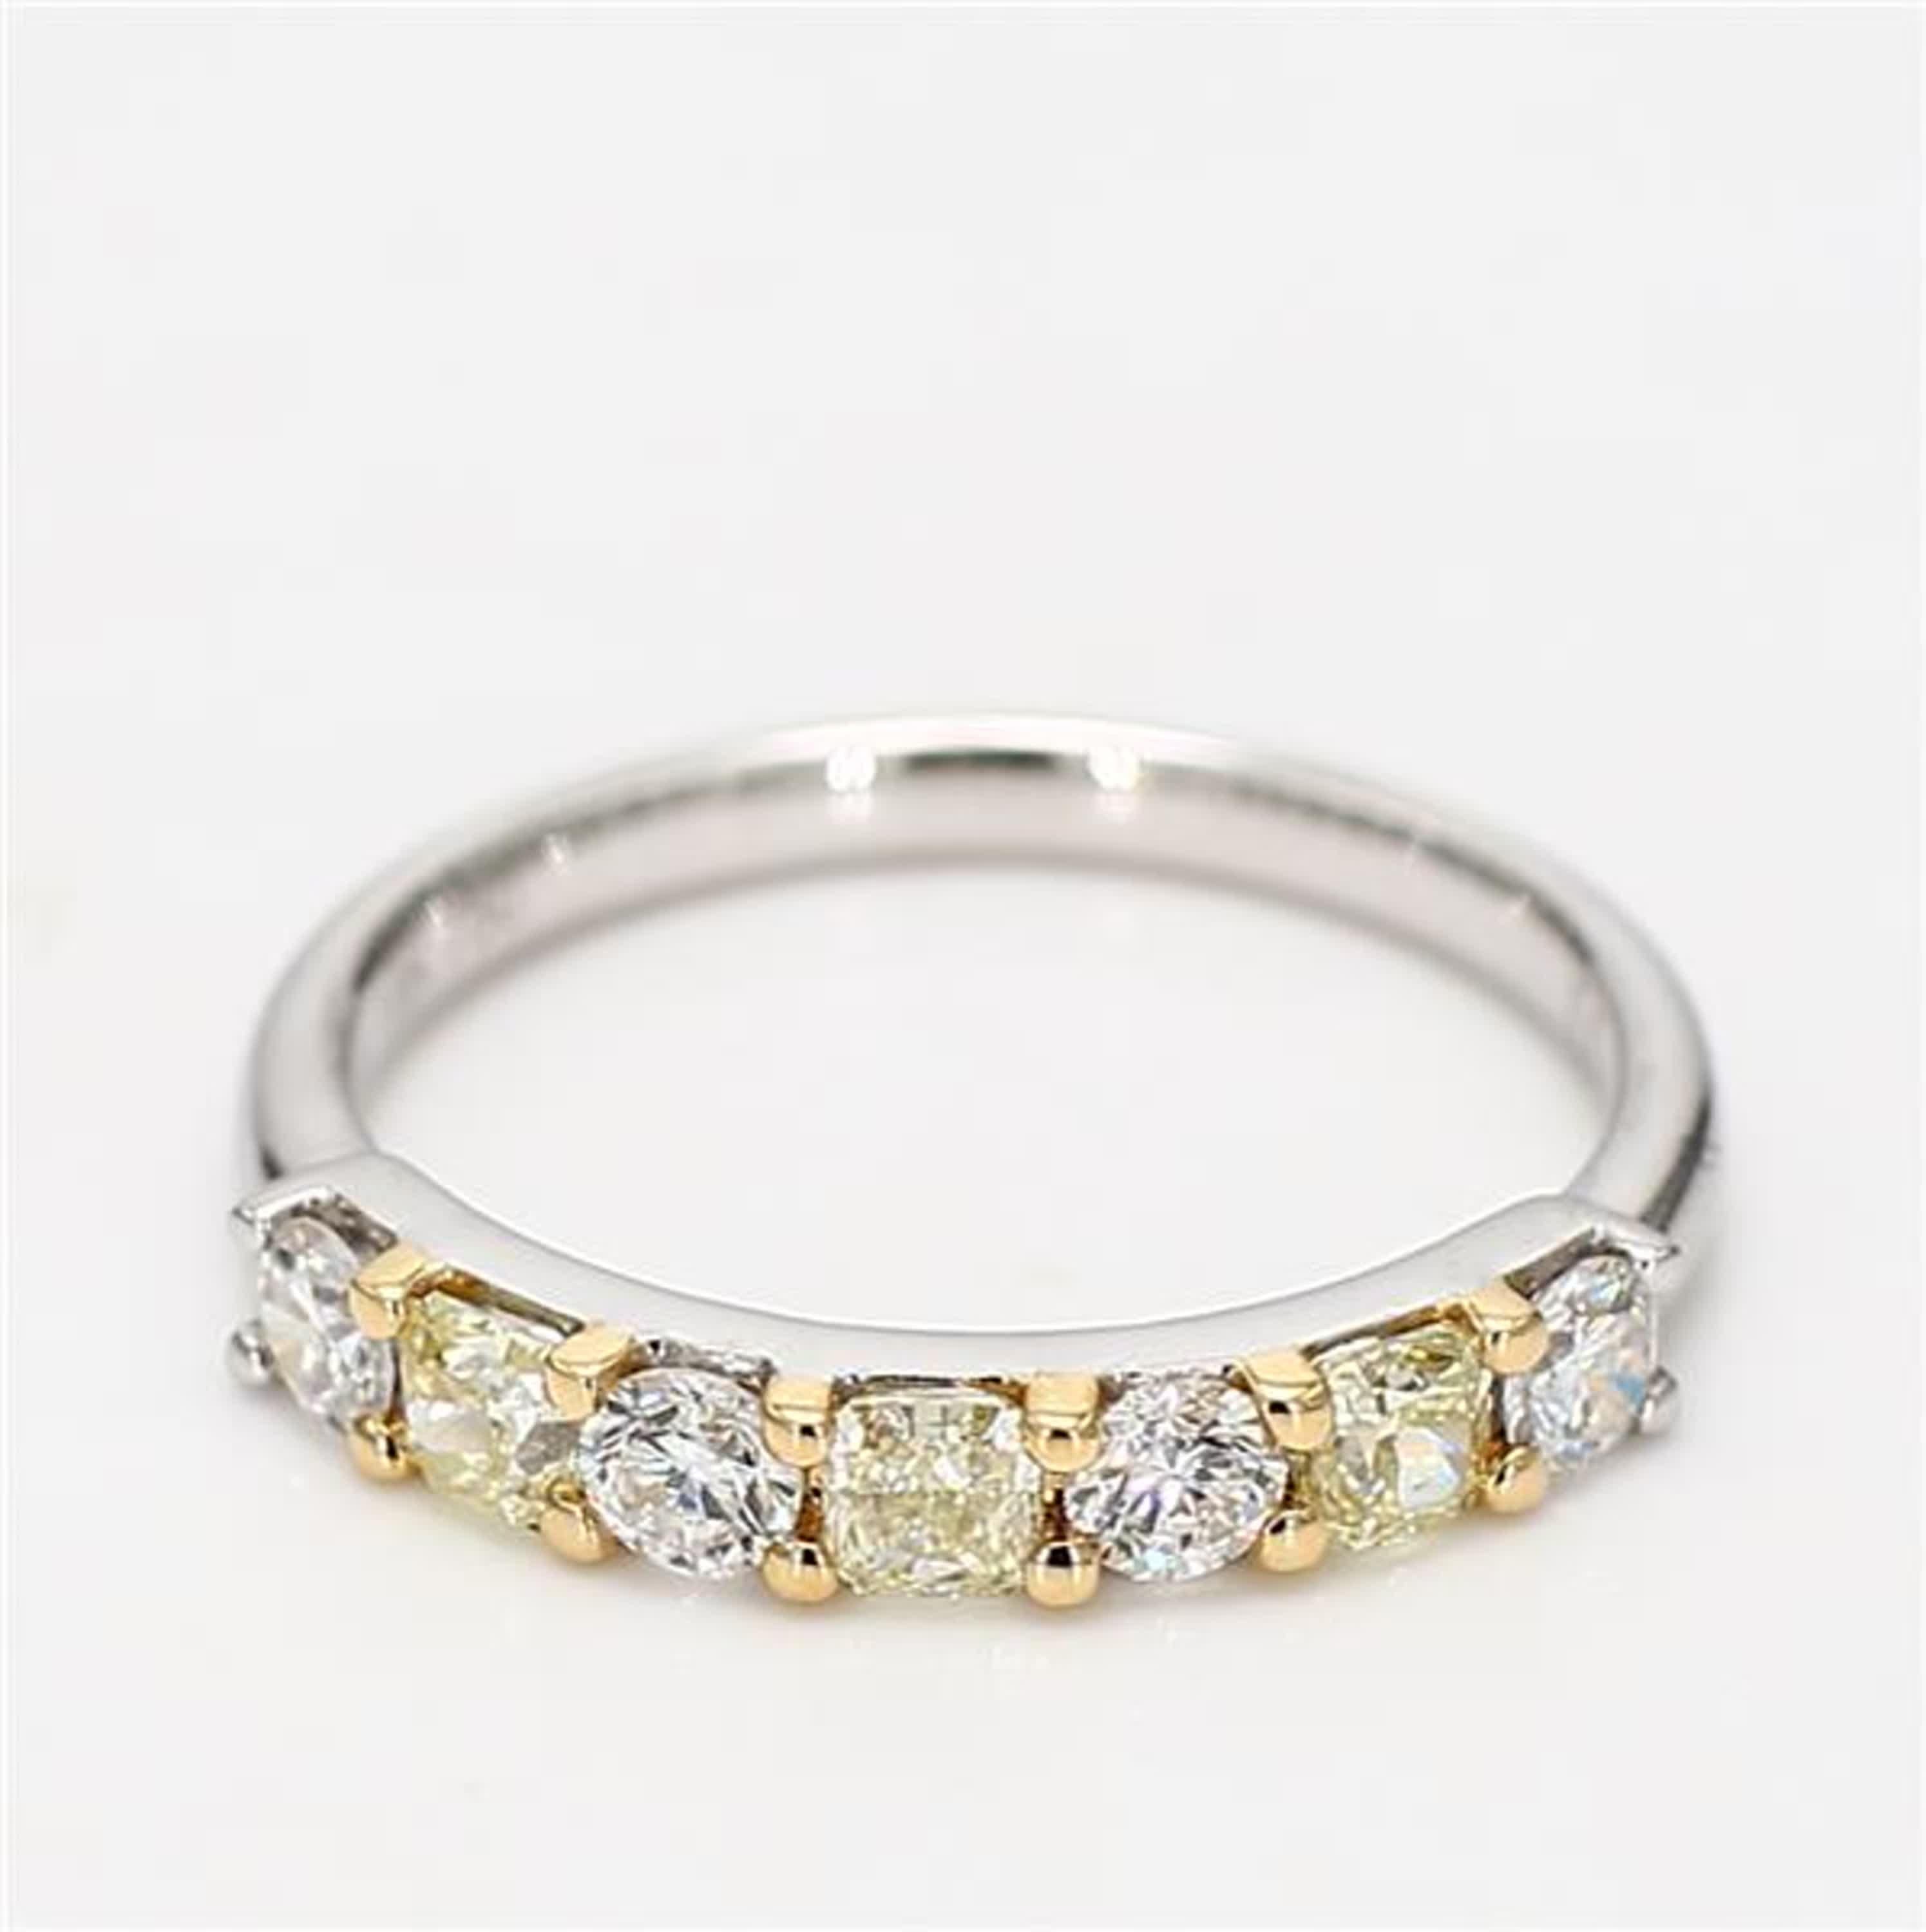 RareGemWorld's classic diamond band. Mounted in a beautiful 18K Yellow and White Gold setting with natural radiant cut yellow diamonds complimented by natural round cut white diamonds. This band is guaranteed to impress and enhance your personal